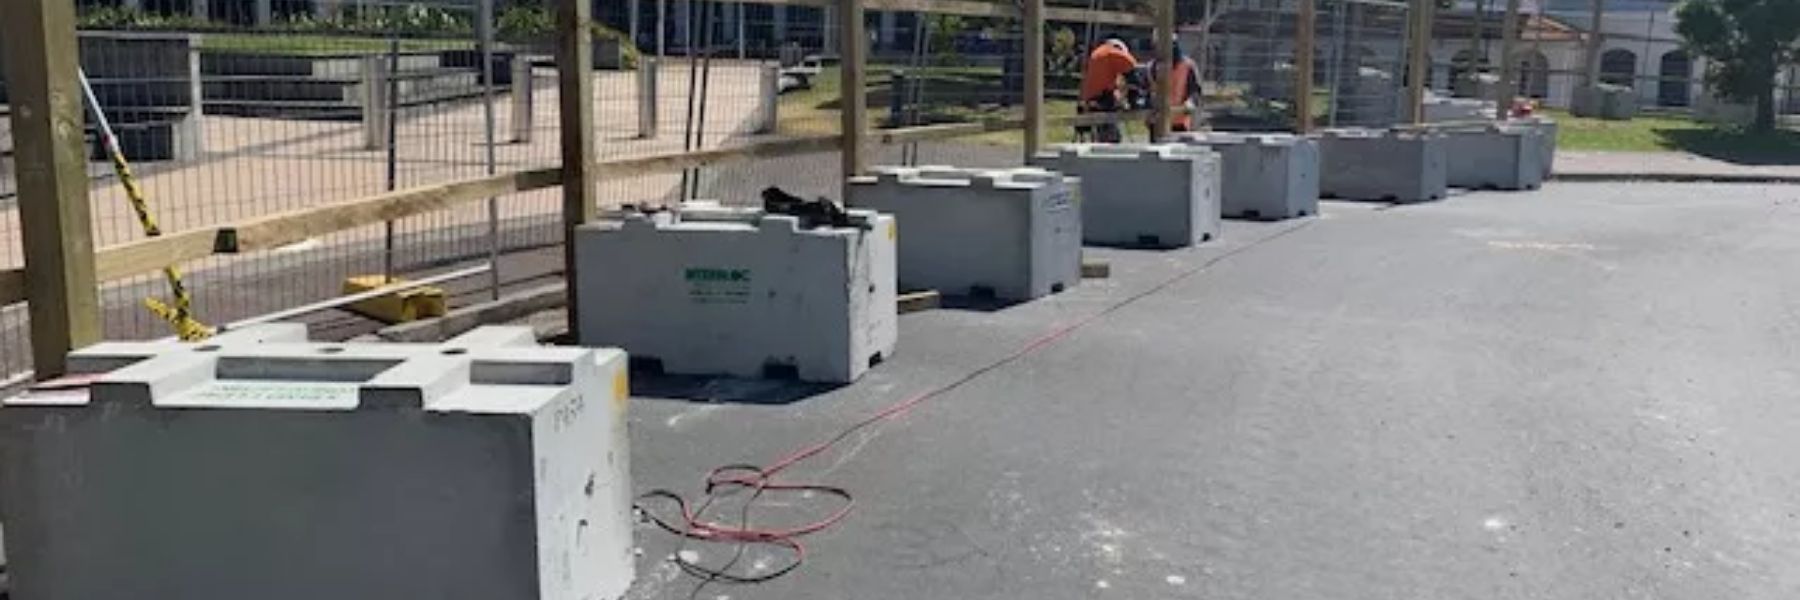 Southbase Construction using the 1200 Interbloc standard concrete blocks as counterweights